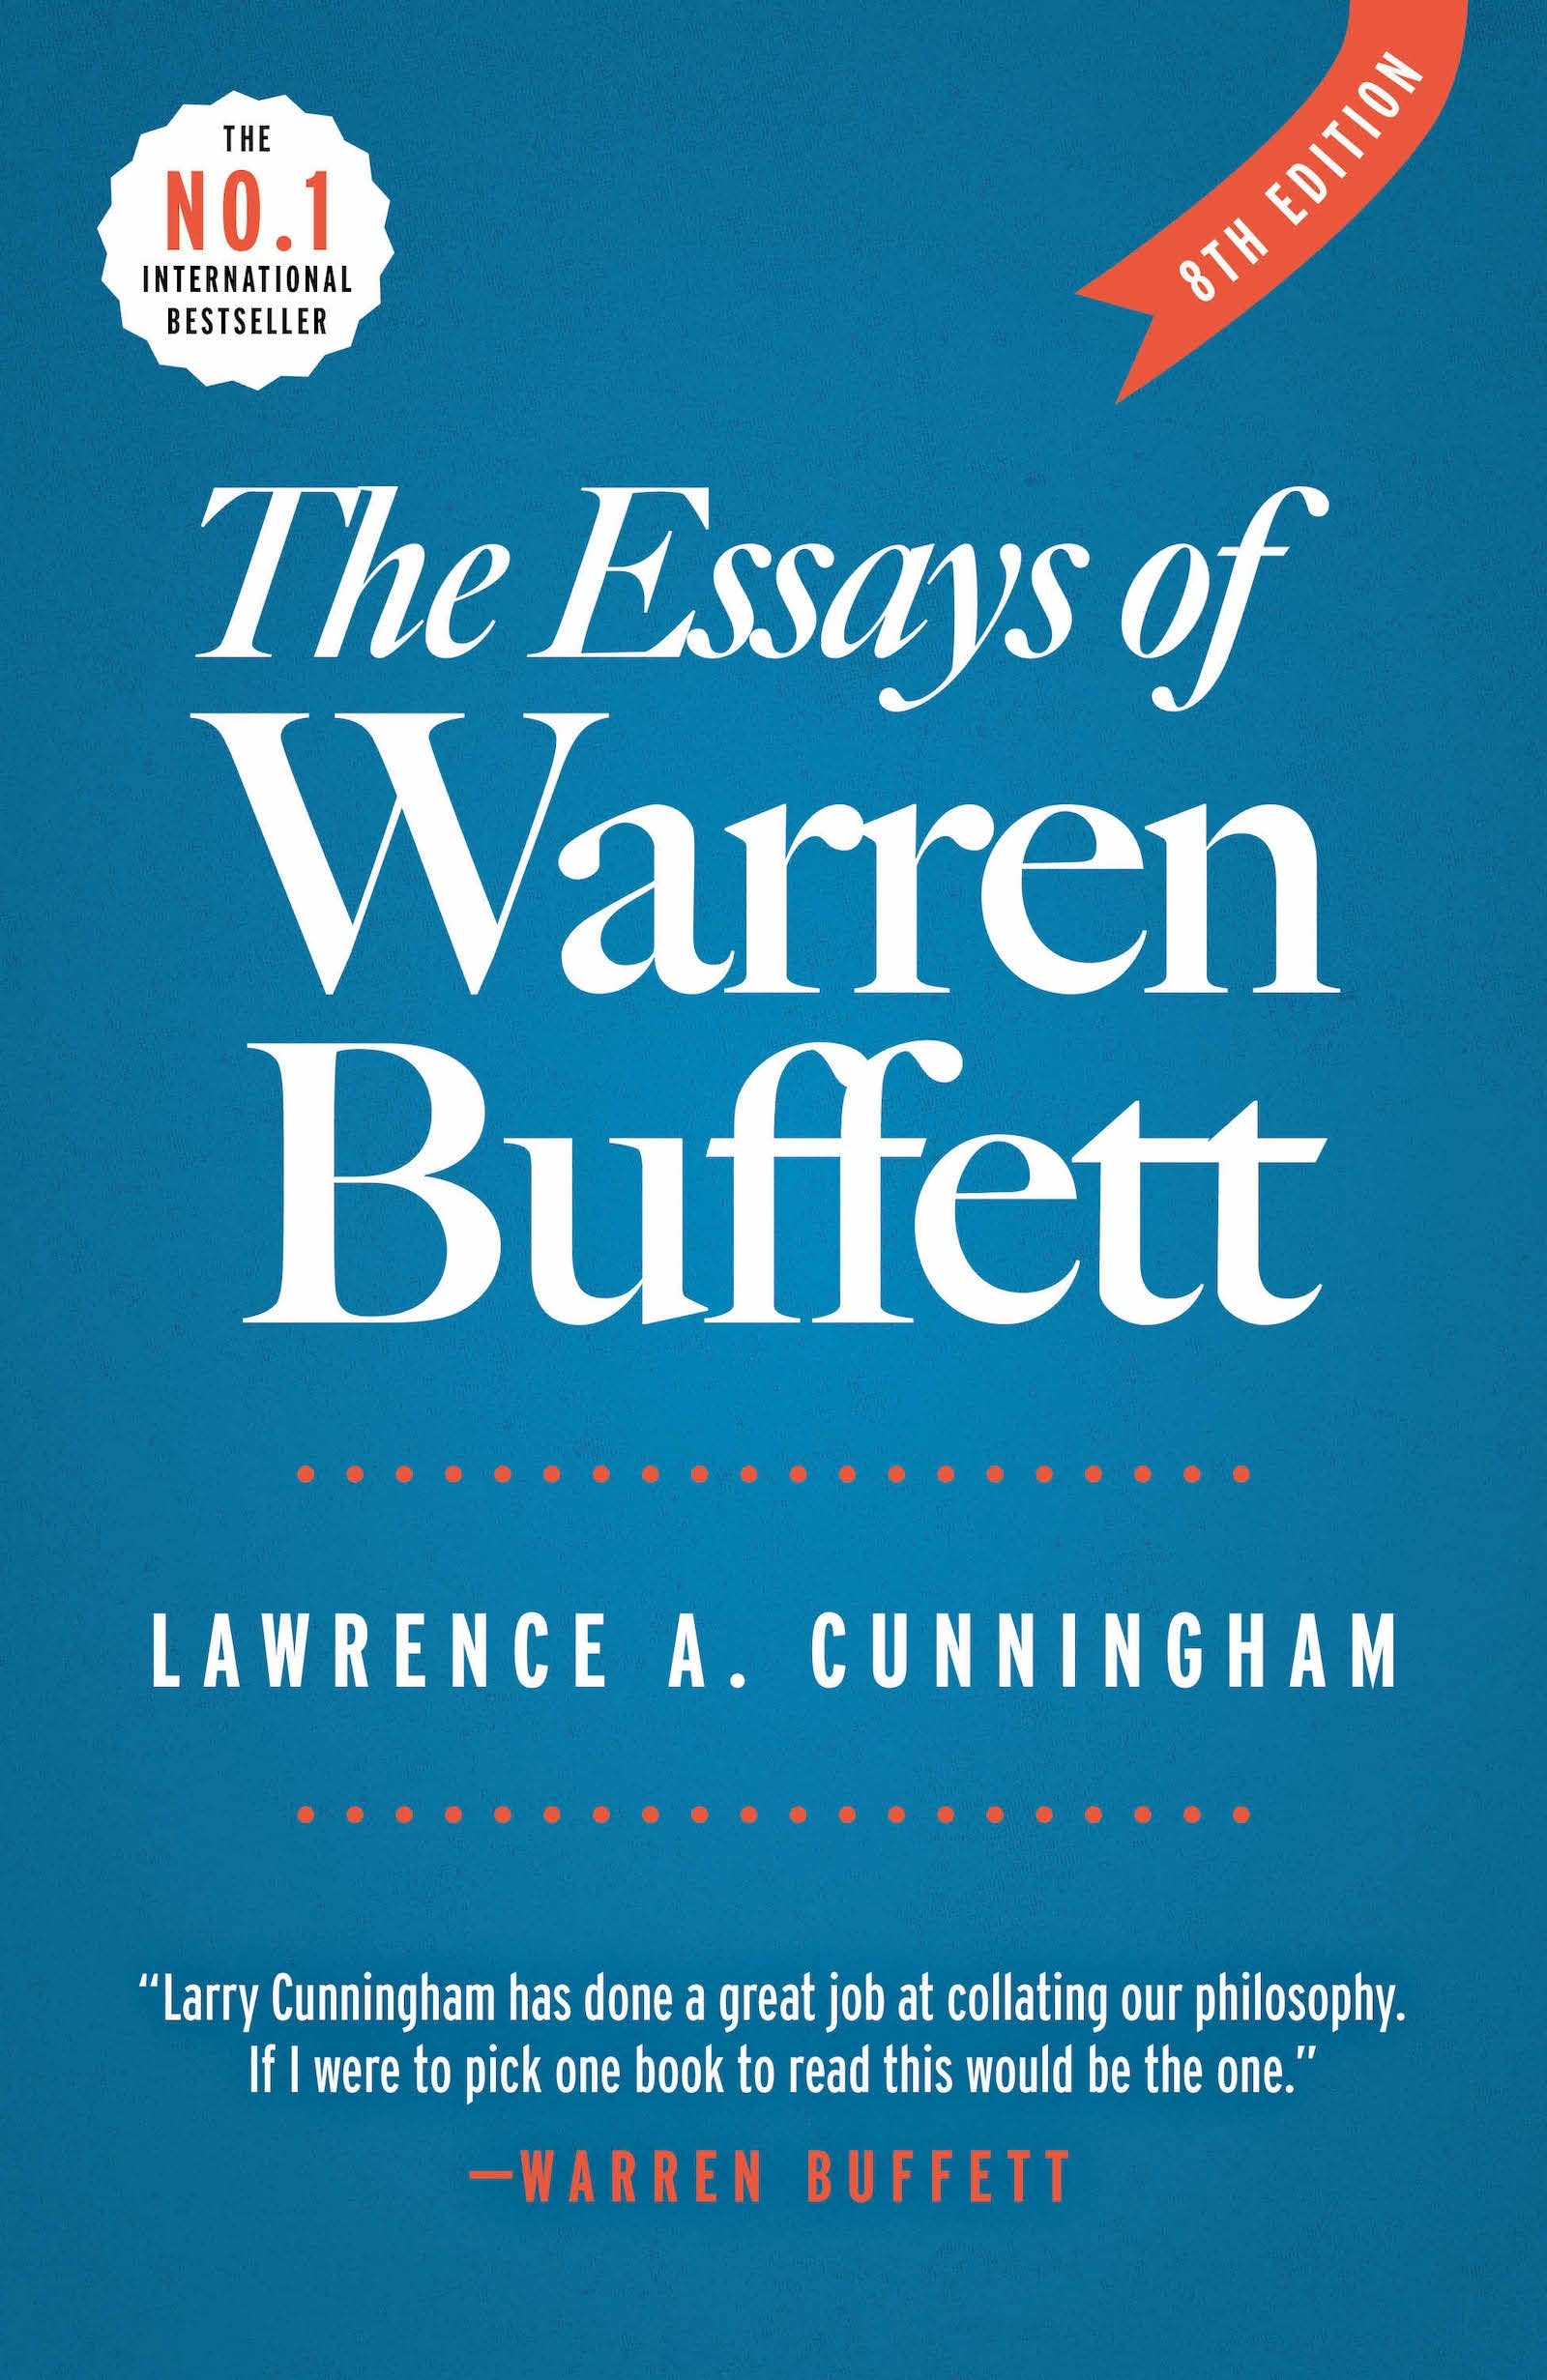 The Essays of Warren Buffett: Lessons for Corporate America by Cunningham, Lawrence a.